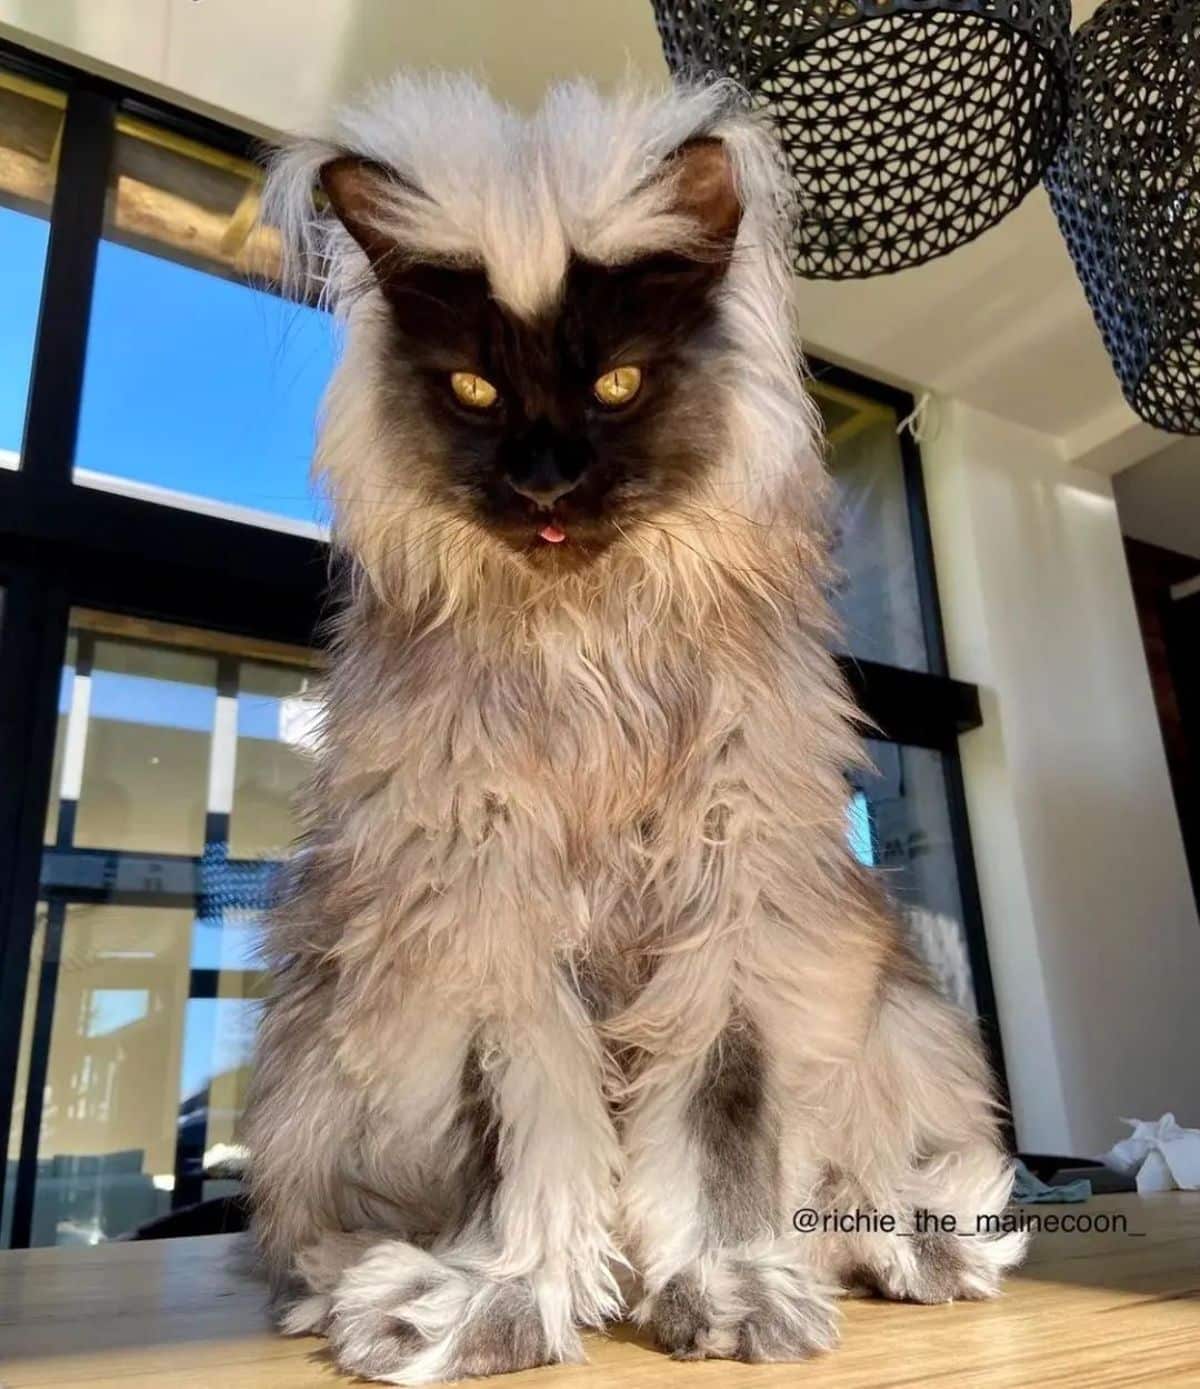 A beautiful gray maine coon sitting on a wooden floor.